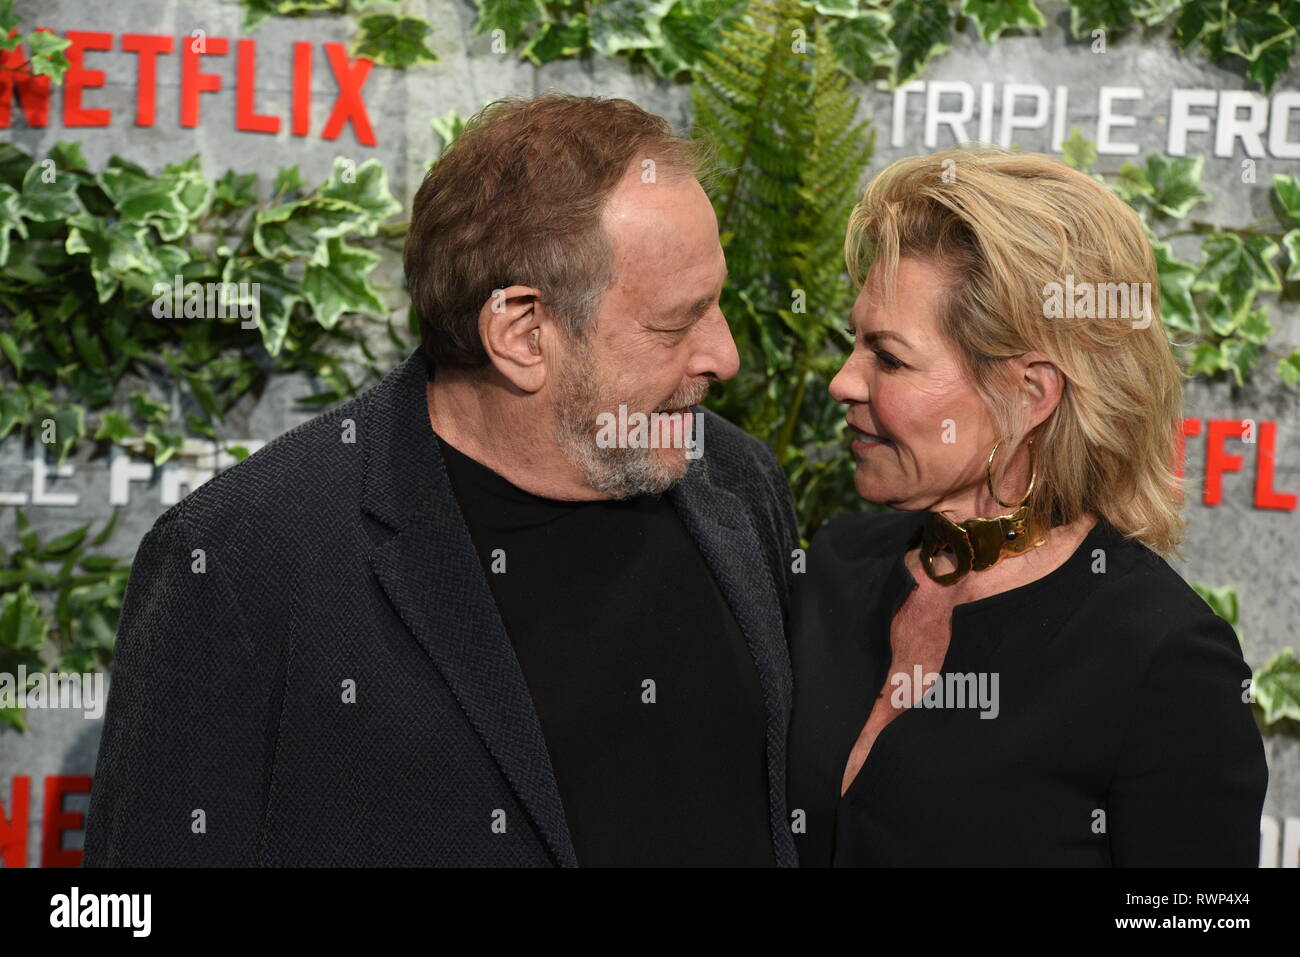 Madrid, Spain. 06th Mar, 2019. Producer Charles Roven (left) and his wife Stephanie Haymes Roven pose as they arrive for the premiere of 'Triple Frontier' at Callao Cinema in Madrid. Credit: Jorge Sanz/Pacific Press/Alamy Live News Stock Photo